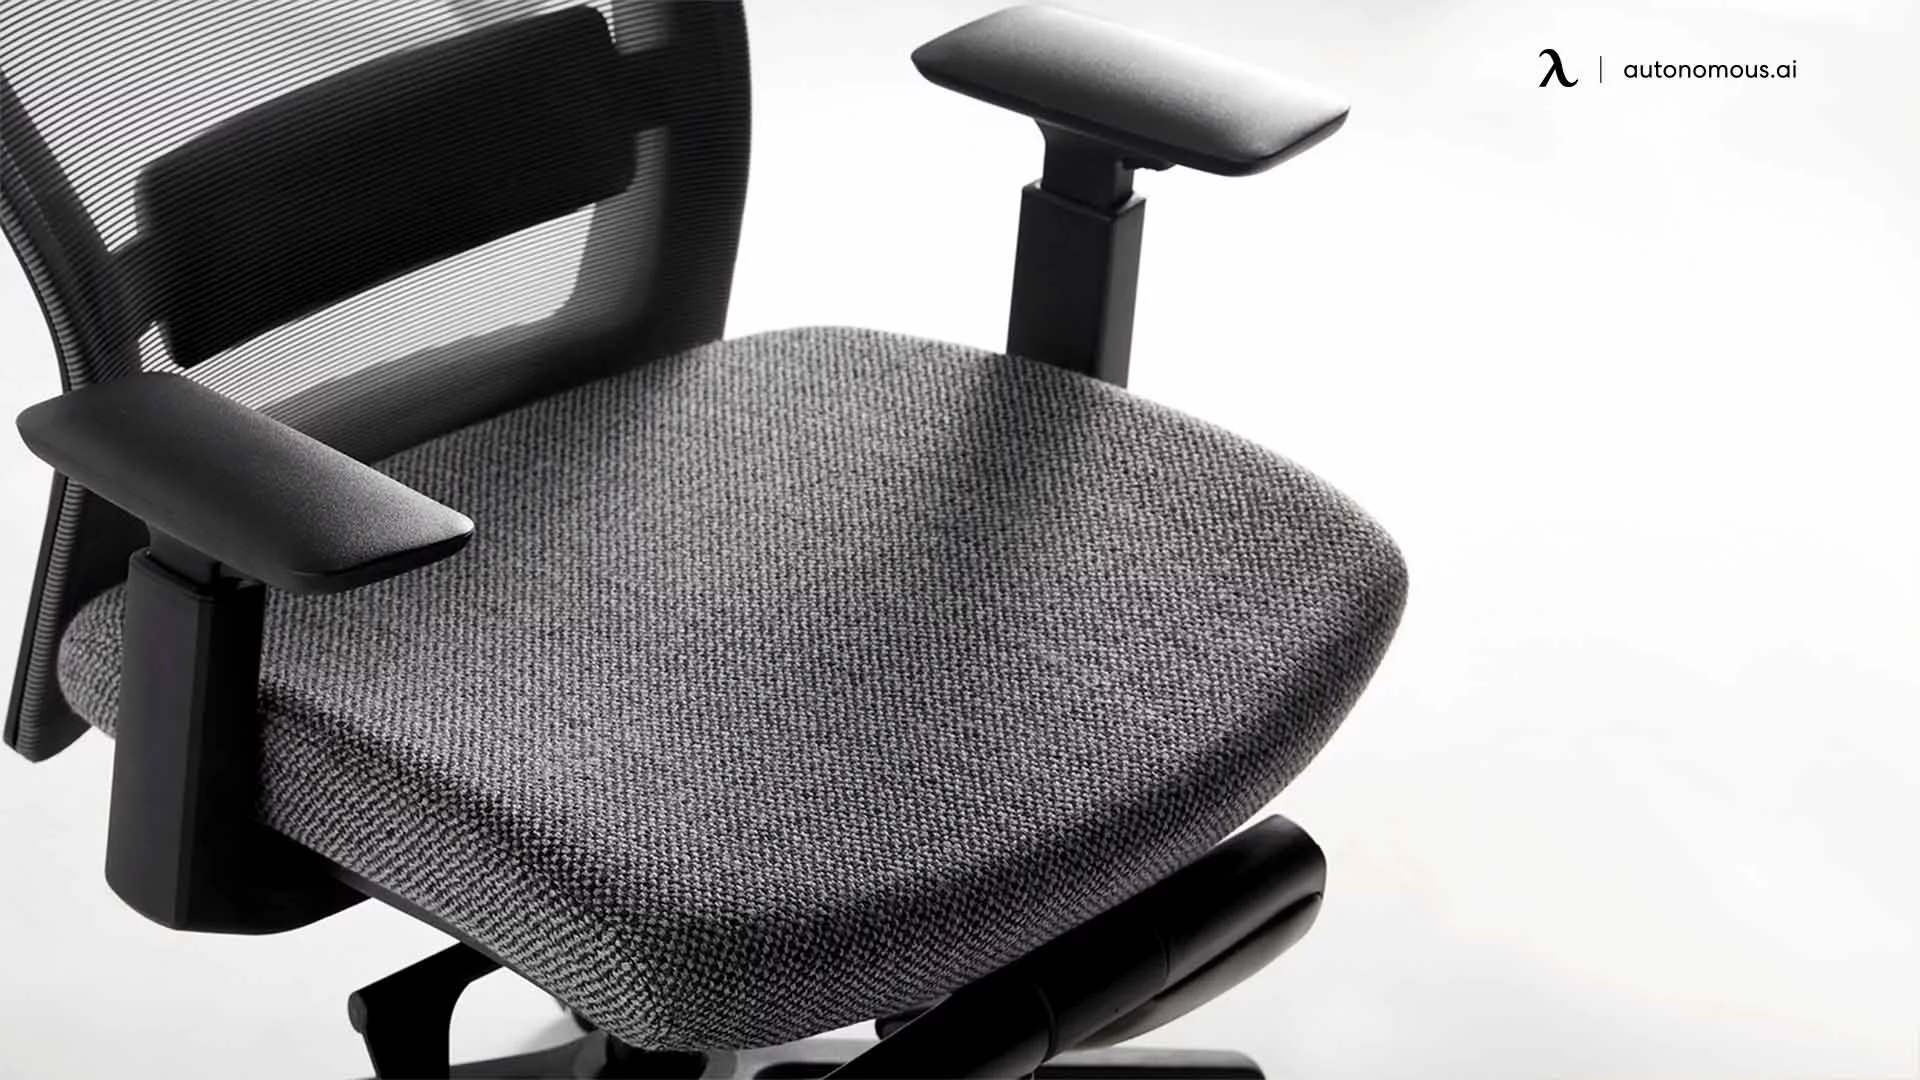 Seat base of upholstered office chair